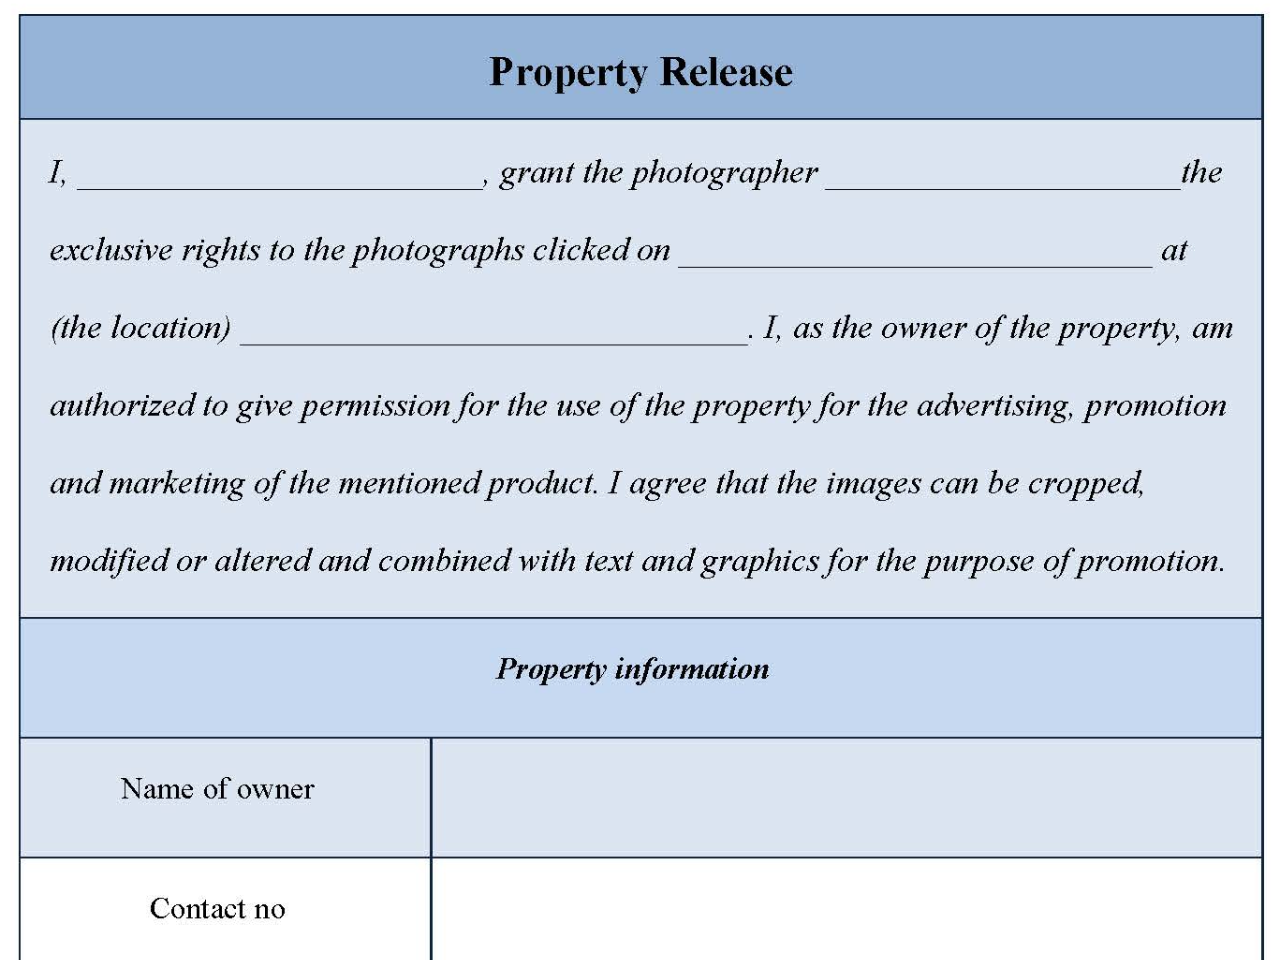 Property Release form